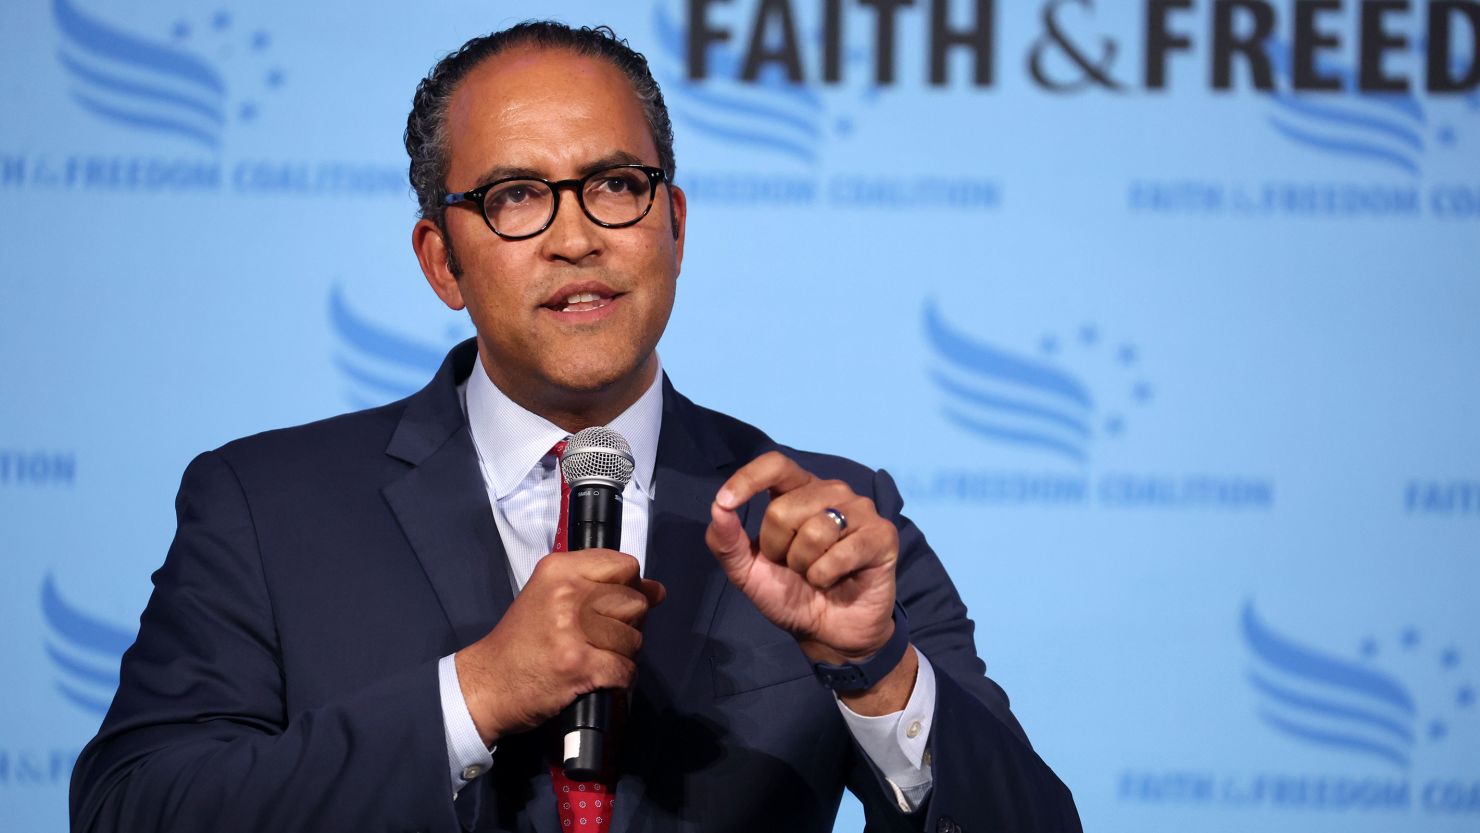 Former Texas Rep. Will Hurd speaks to guests at the Iowa Faith & Freedom Coalition's spring event in Clive on April 22, 2023.